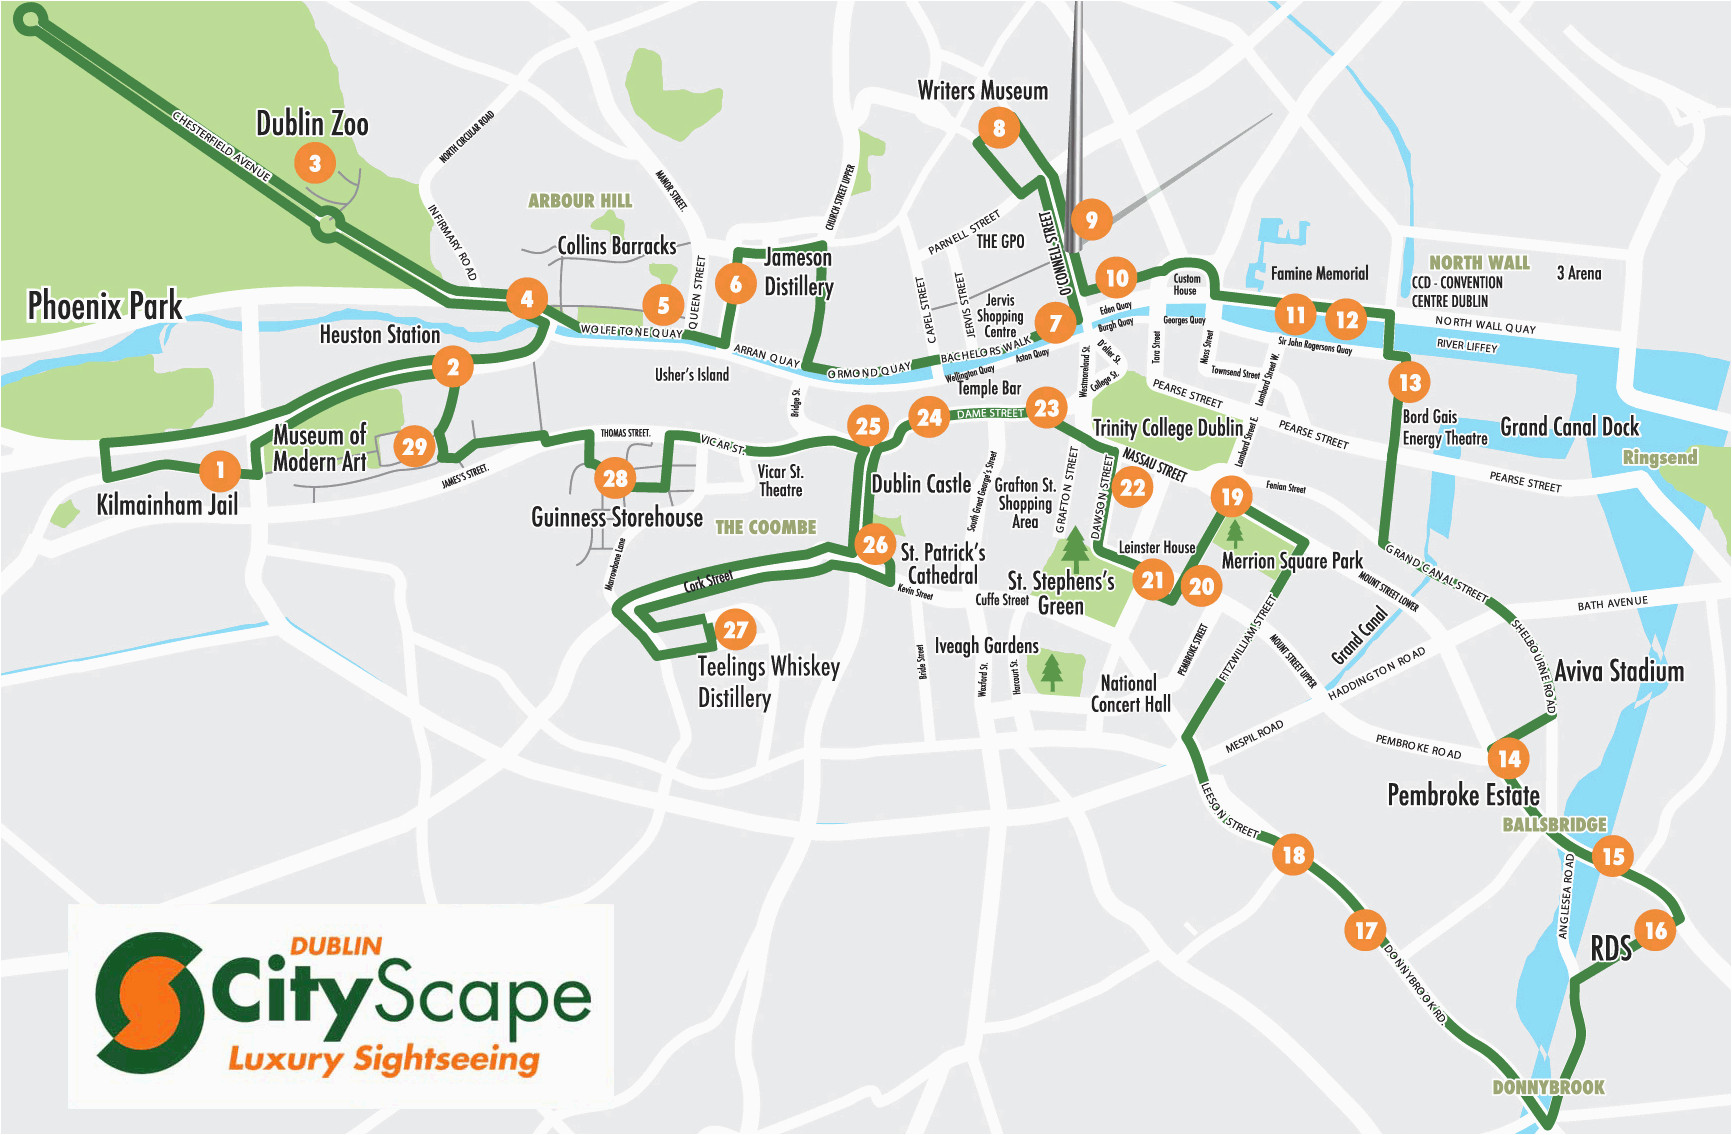 cityscape dublin hop on hop off sightseeing tour route map